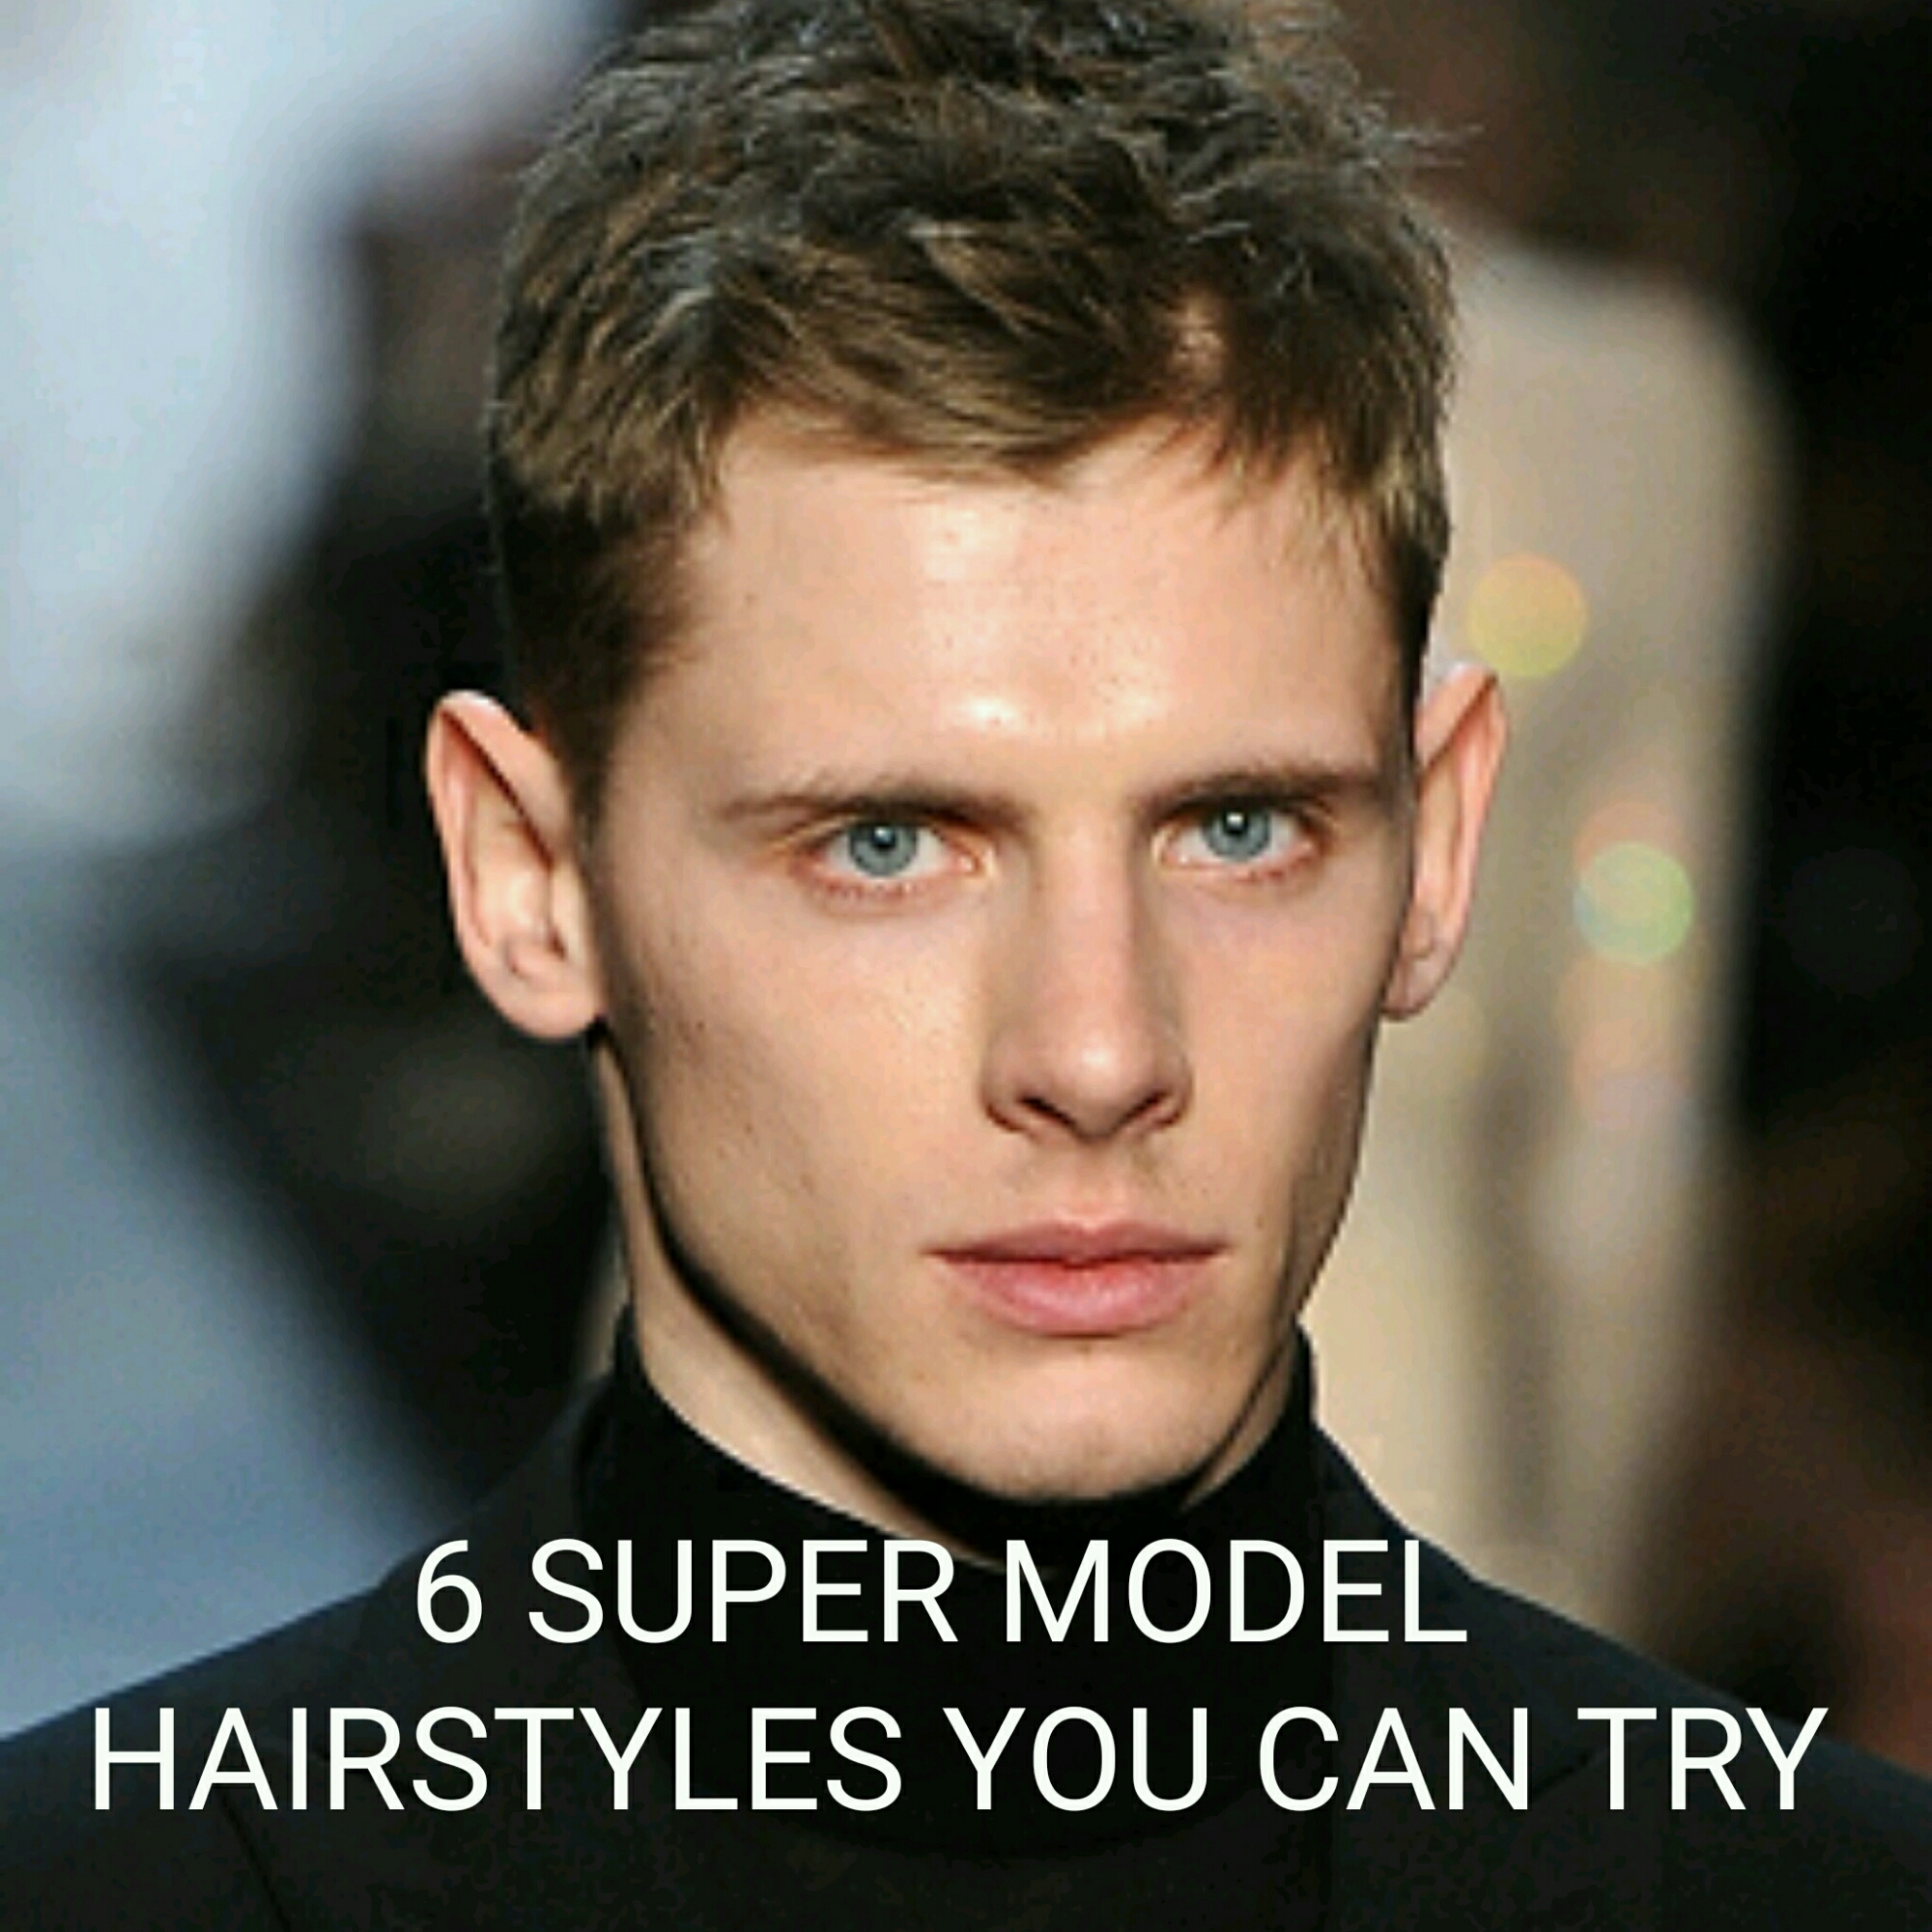 6 super model hairstyles you can try – coolest hairstyles